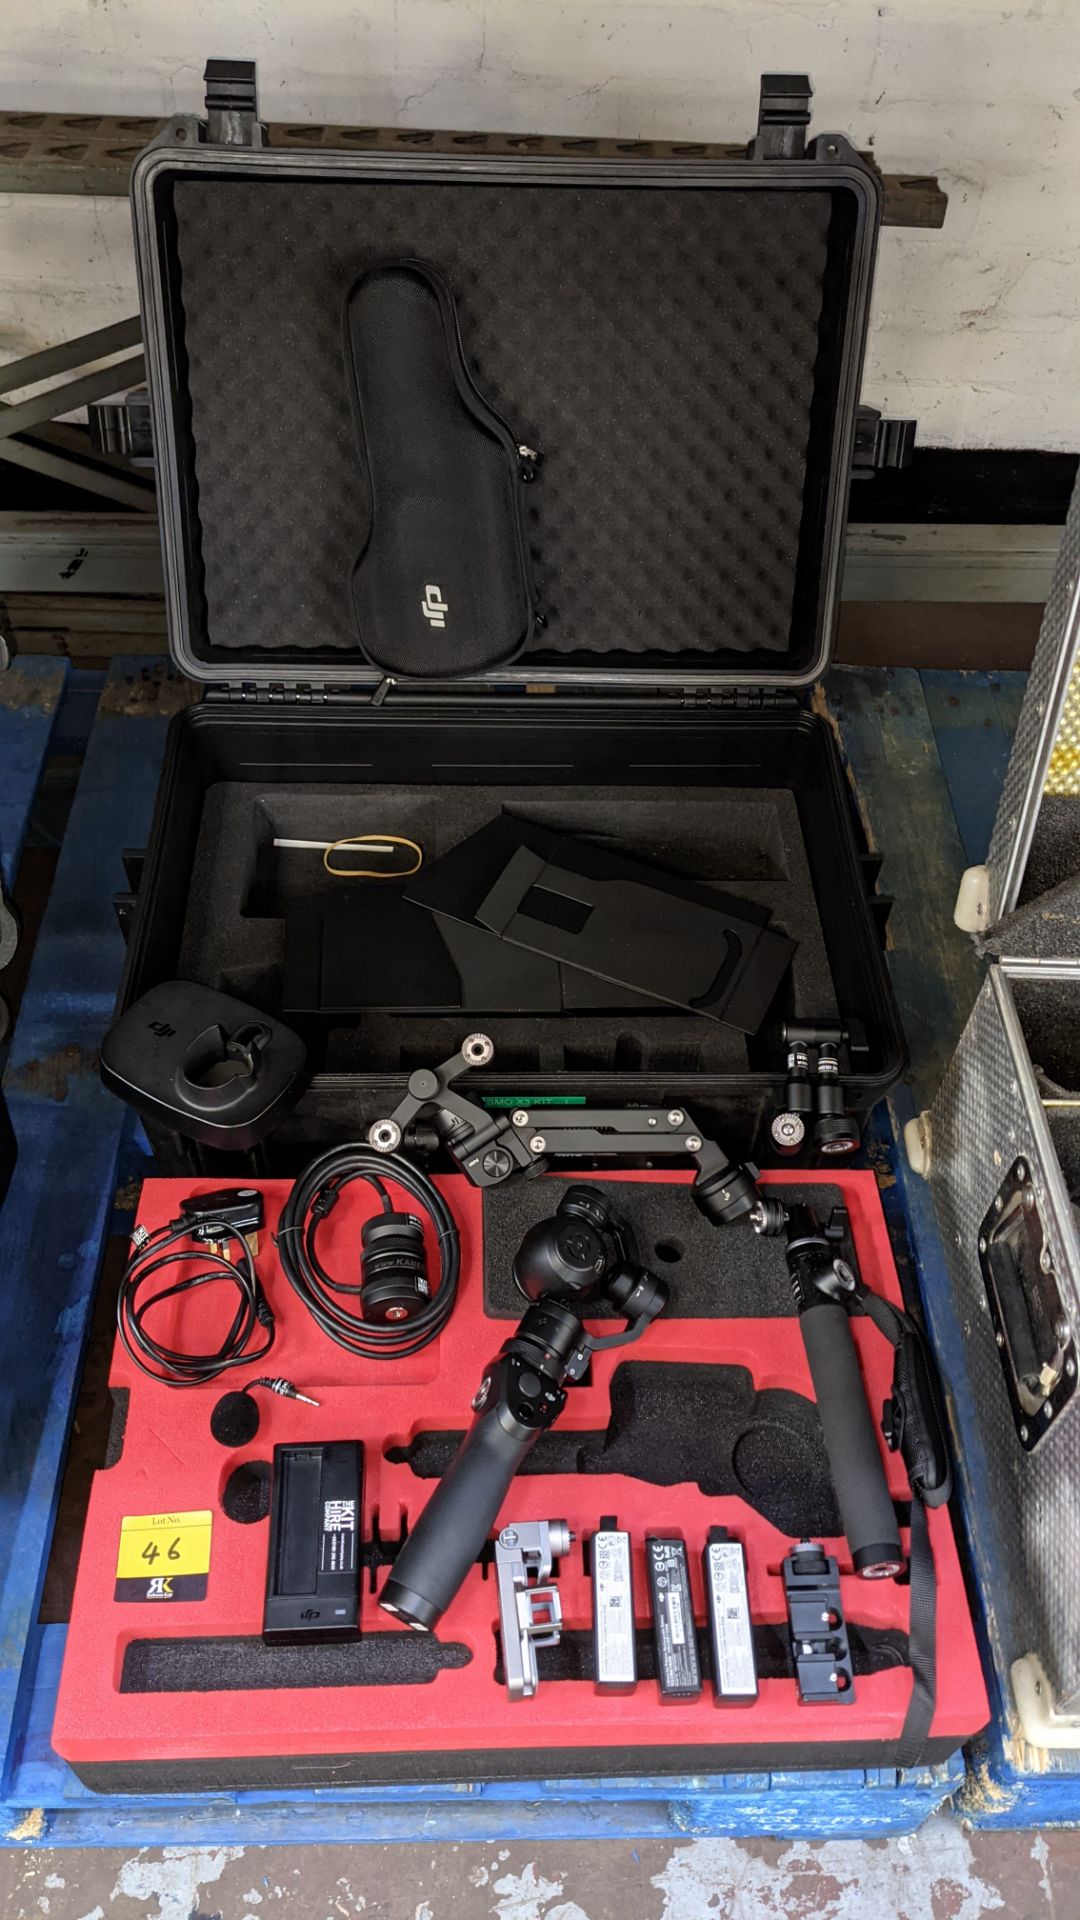 DJI Osmo X3 kit comprising hand-held gimbal plus wide variety of ancillaries for use with same, as d - Image 2 of 20